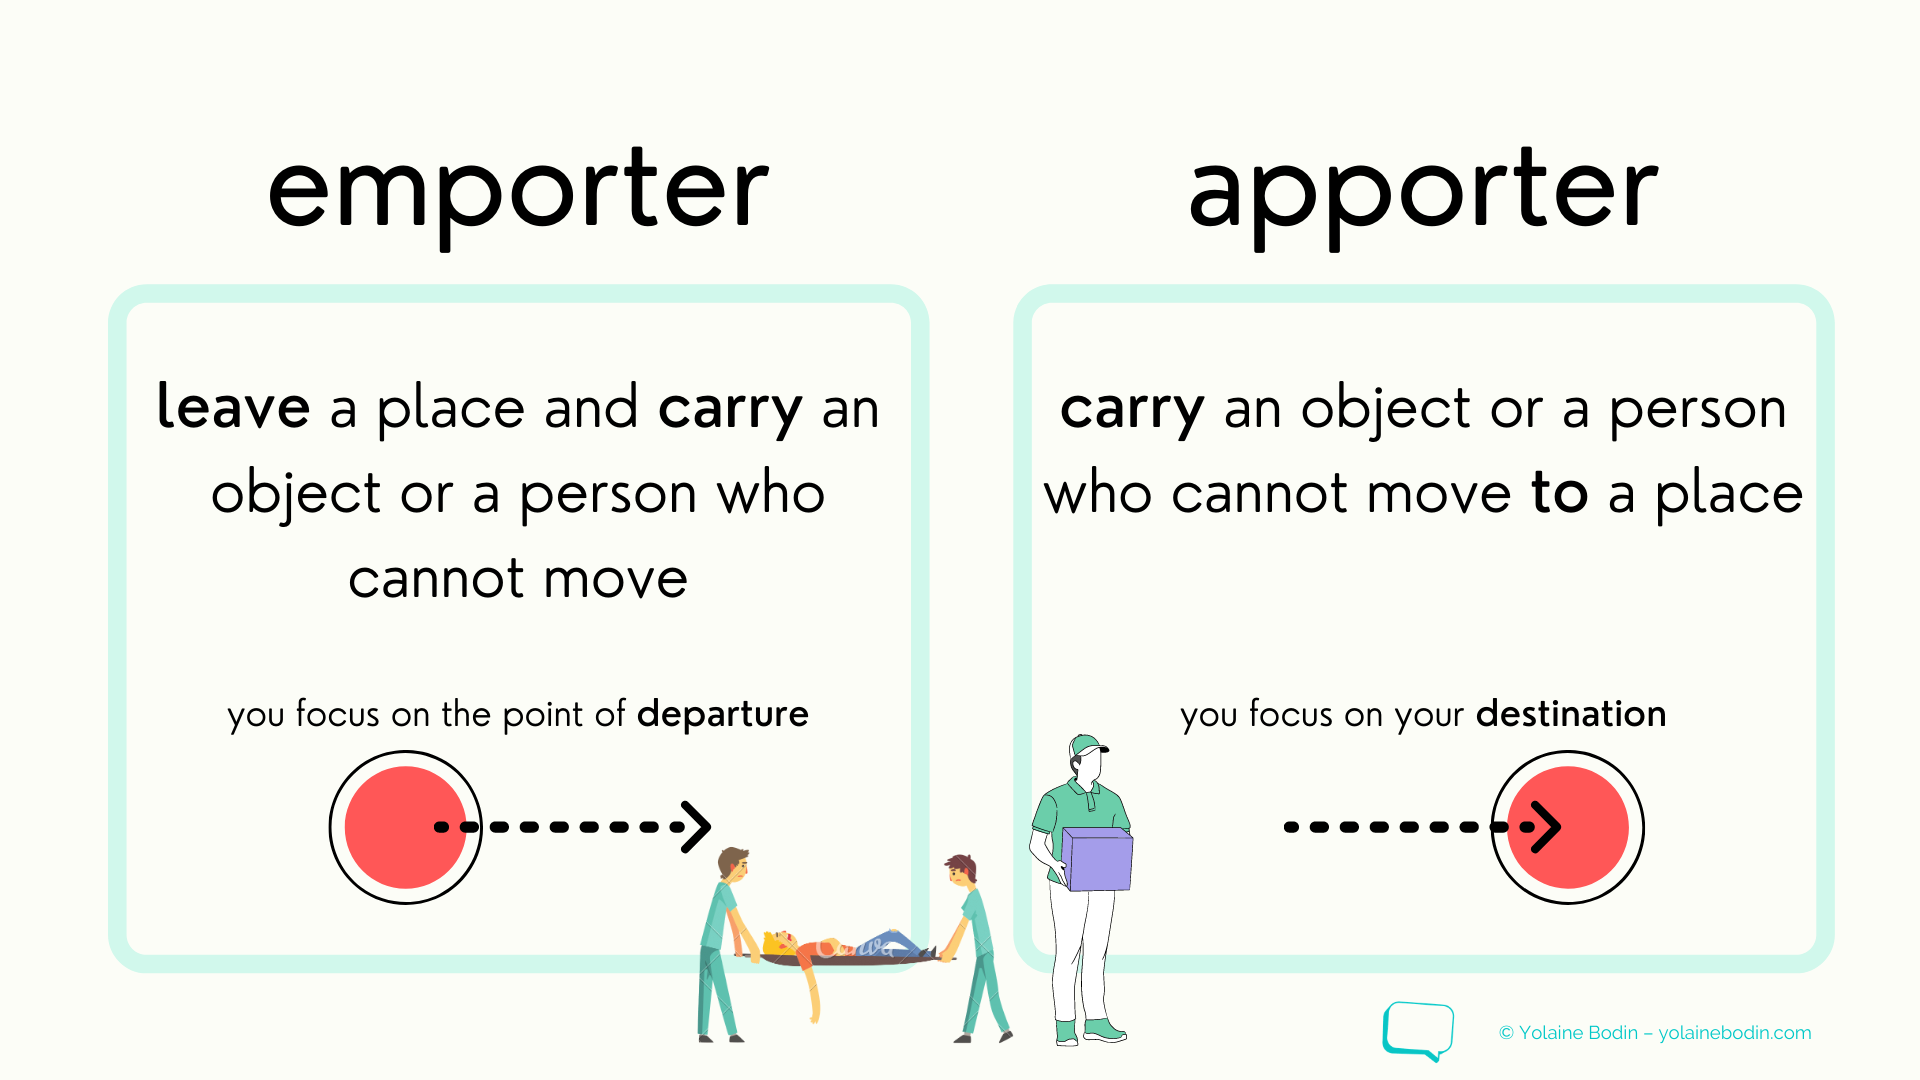 illustration to explain the difference between emporter and apporter